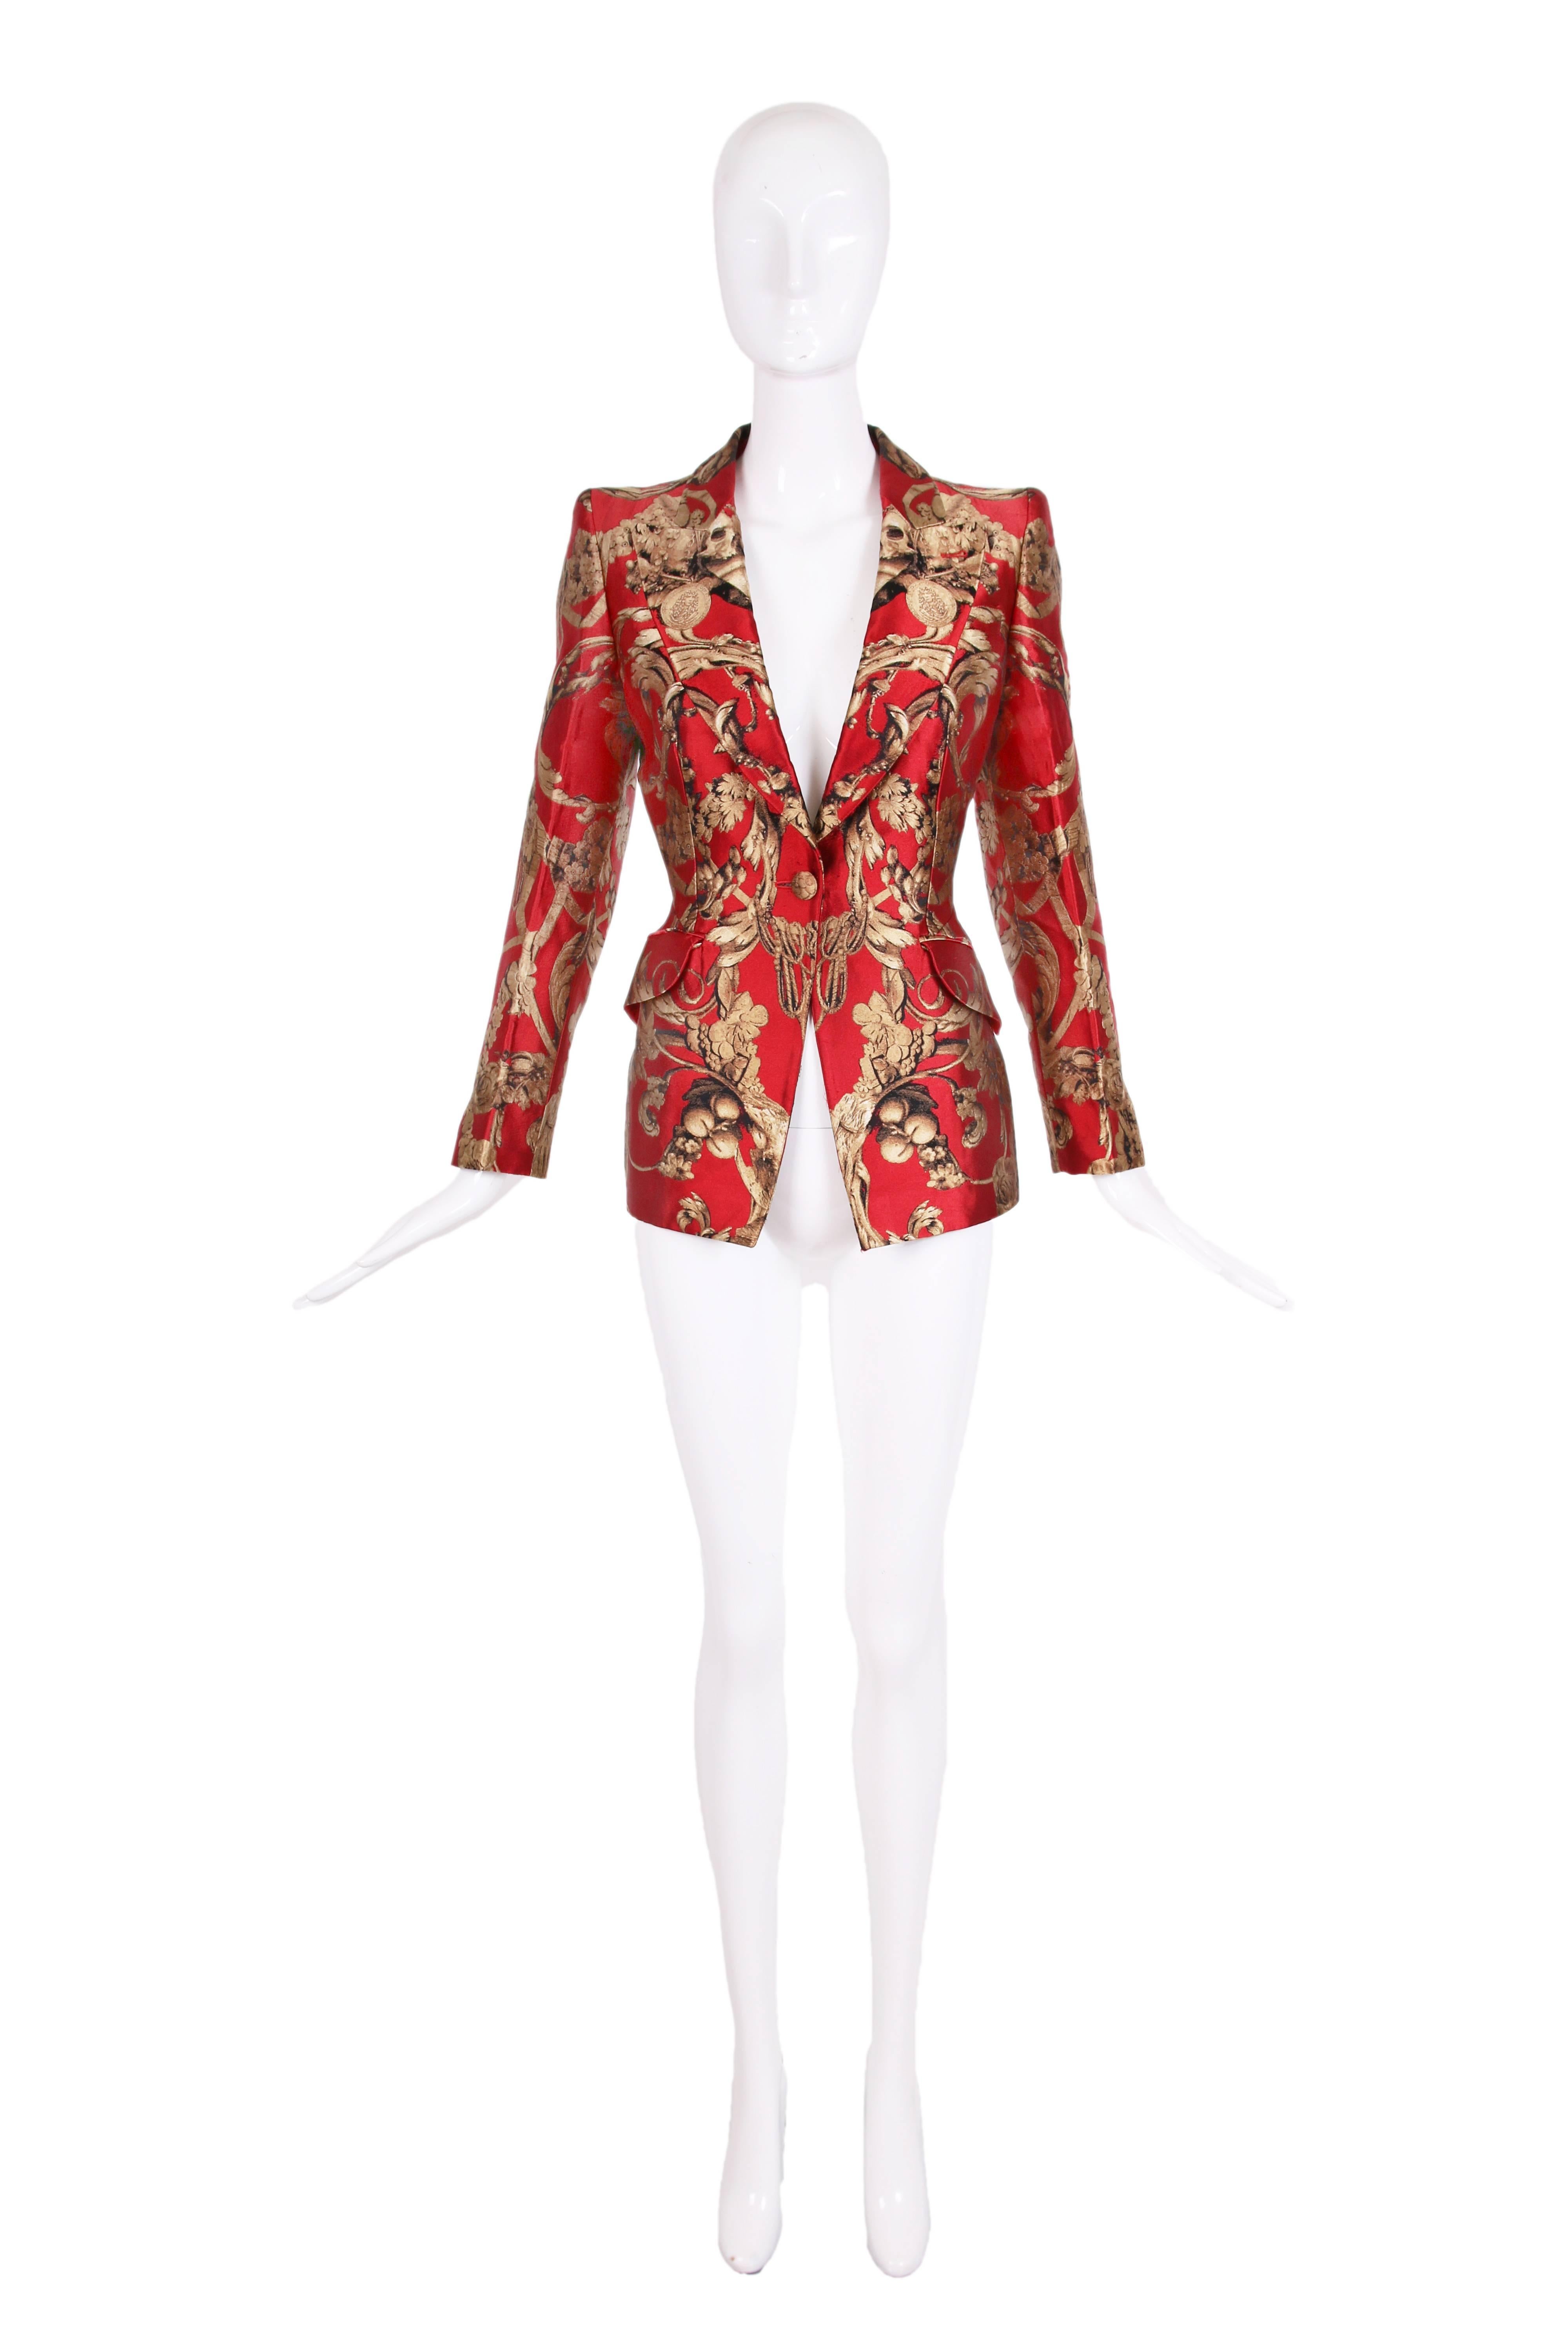 2010 Alexander McQueen silk red and gold foliate print w/medallions fitted blazer with single button and two frontal pockets. In excellent condition. Size 42 - please consult measurements.
MEASUREMENTS:
Shoulders - 15"
Sleeves - 23"
Bust -